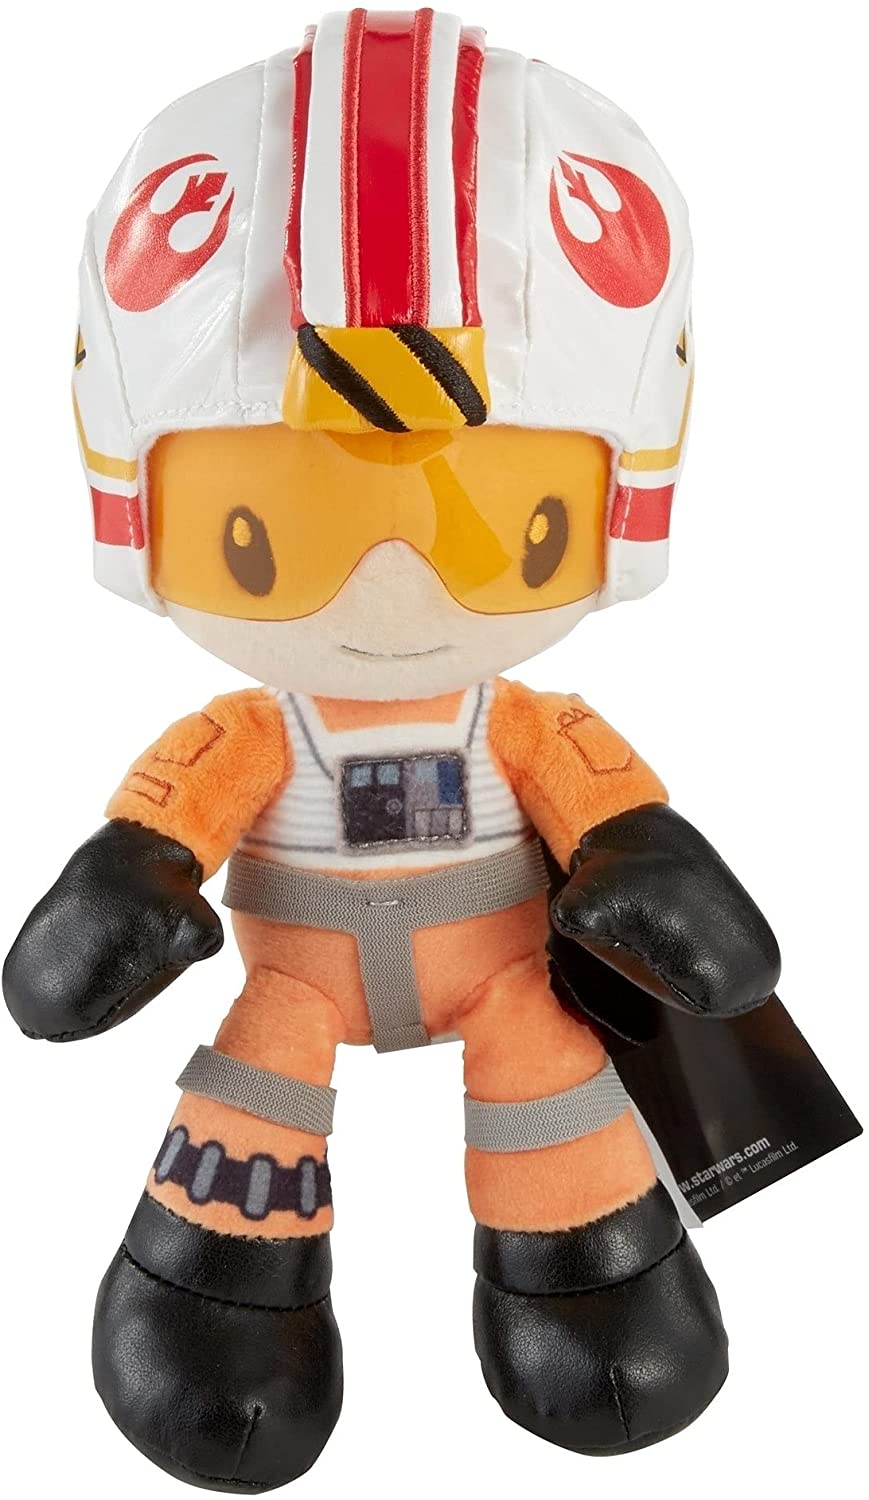 Star Wars Plush 8-in Character Dolls Collectible Movie Gift for Fans Age 3 Years Old & Up Soft 